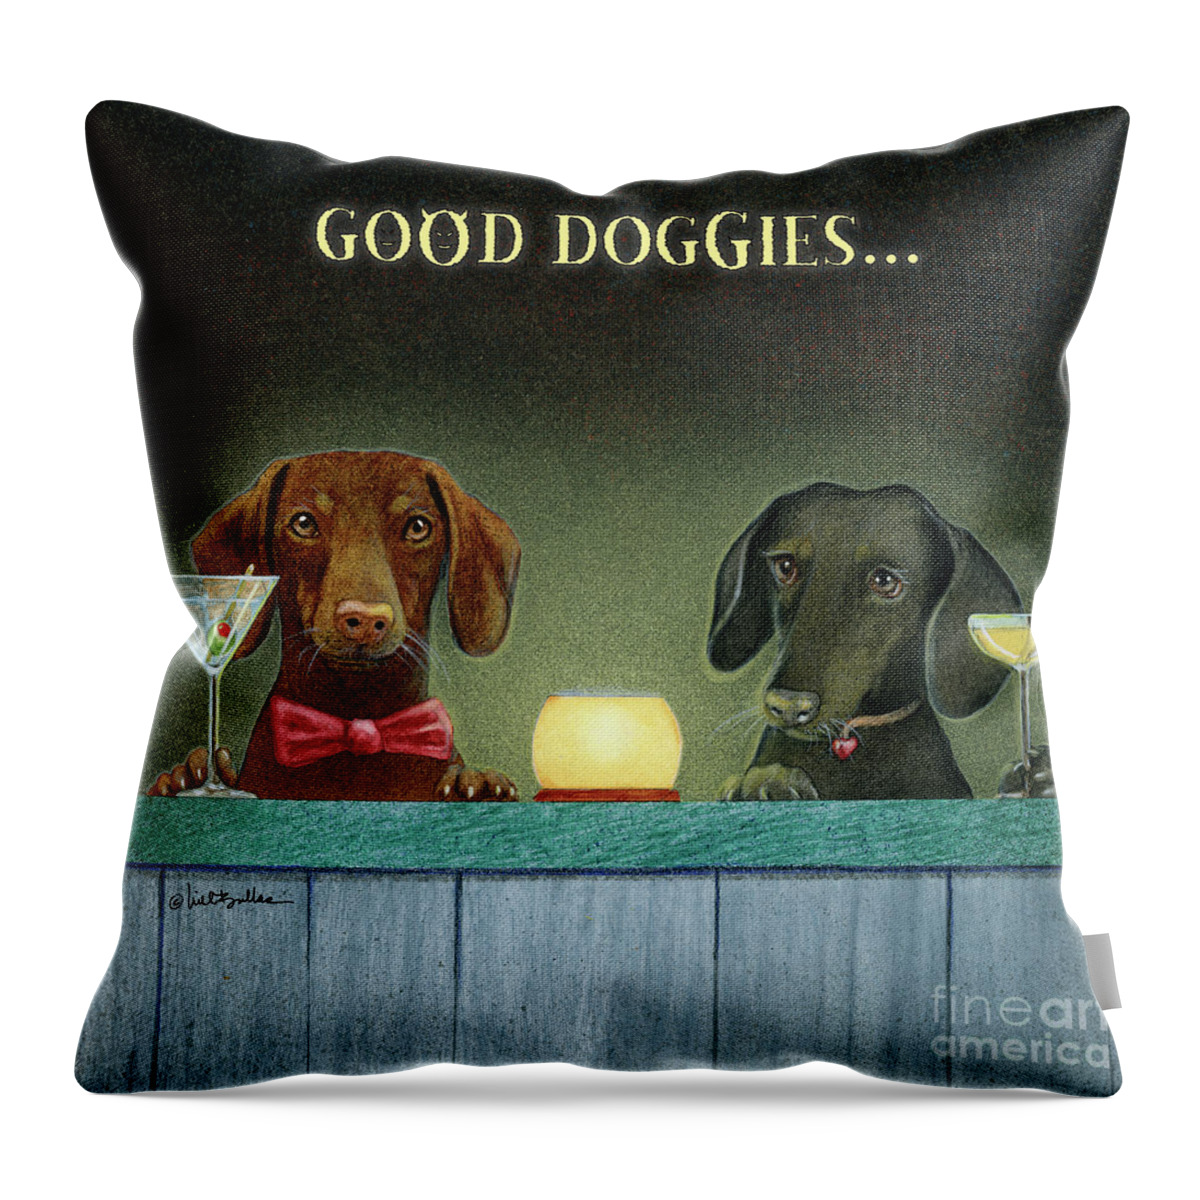 Dachshunds Throw Pillow featuring the painting Good Doggies... #2 by Will Bullas